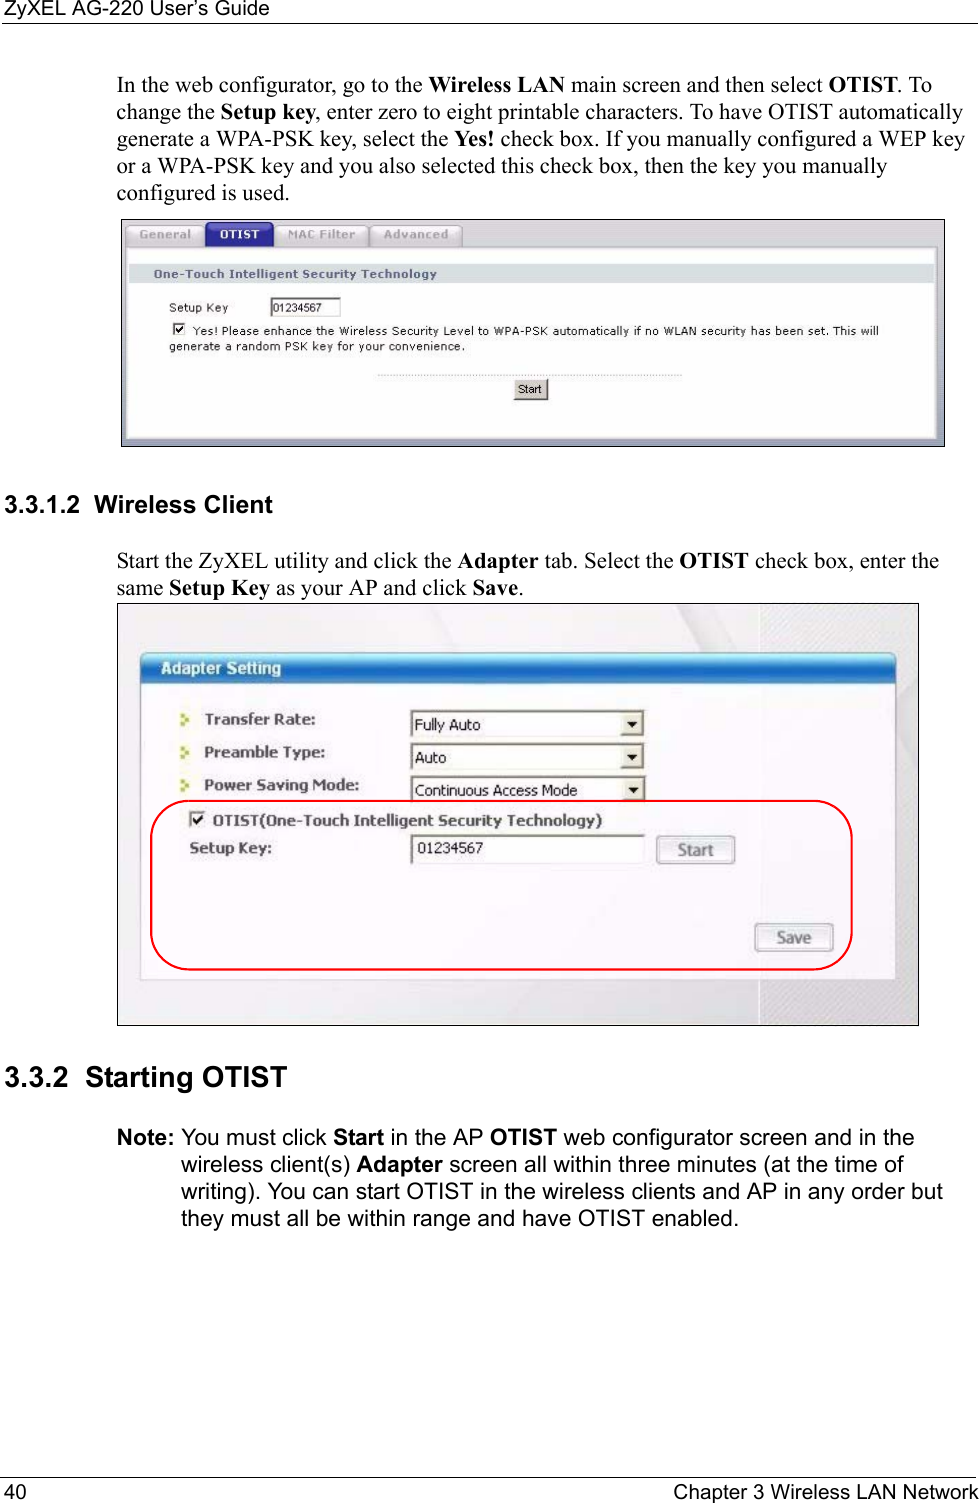 ZyXEL AG-220 User’s Guide40 Chapter 3 Wireless LAN NetworkIn the web configurator, go to the Wireless LAN main screen and then select OTIST. To change the Setup key, enter zero to eight printable characters. To have OTIST automatically generate a WPA-PSK key, select the Yes! check box. If you manually configured a WEP key or a WPA-PSK key and you also selected this check box, then the key you manually configured is used.   3.3.1.2  Wireless ClientStart the ZyXEL utility and click the Adapter tab. Select the OTIST check box, enter the same Setup Key as your AP and click Save.3.3.2  Starting OTIST Note: You must click Start in the AP OTIST web configurator screen and in the wireless client(s) Adapter screen all within three minutes (at the time of writing). You can start OTIST in the wireless clients and AP in any order but they must all be within range and have OTIST enabled.